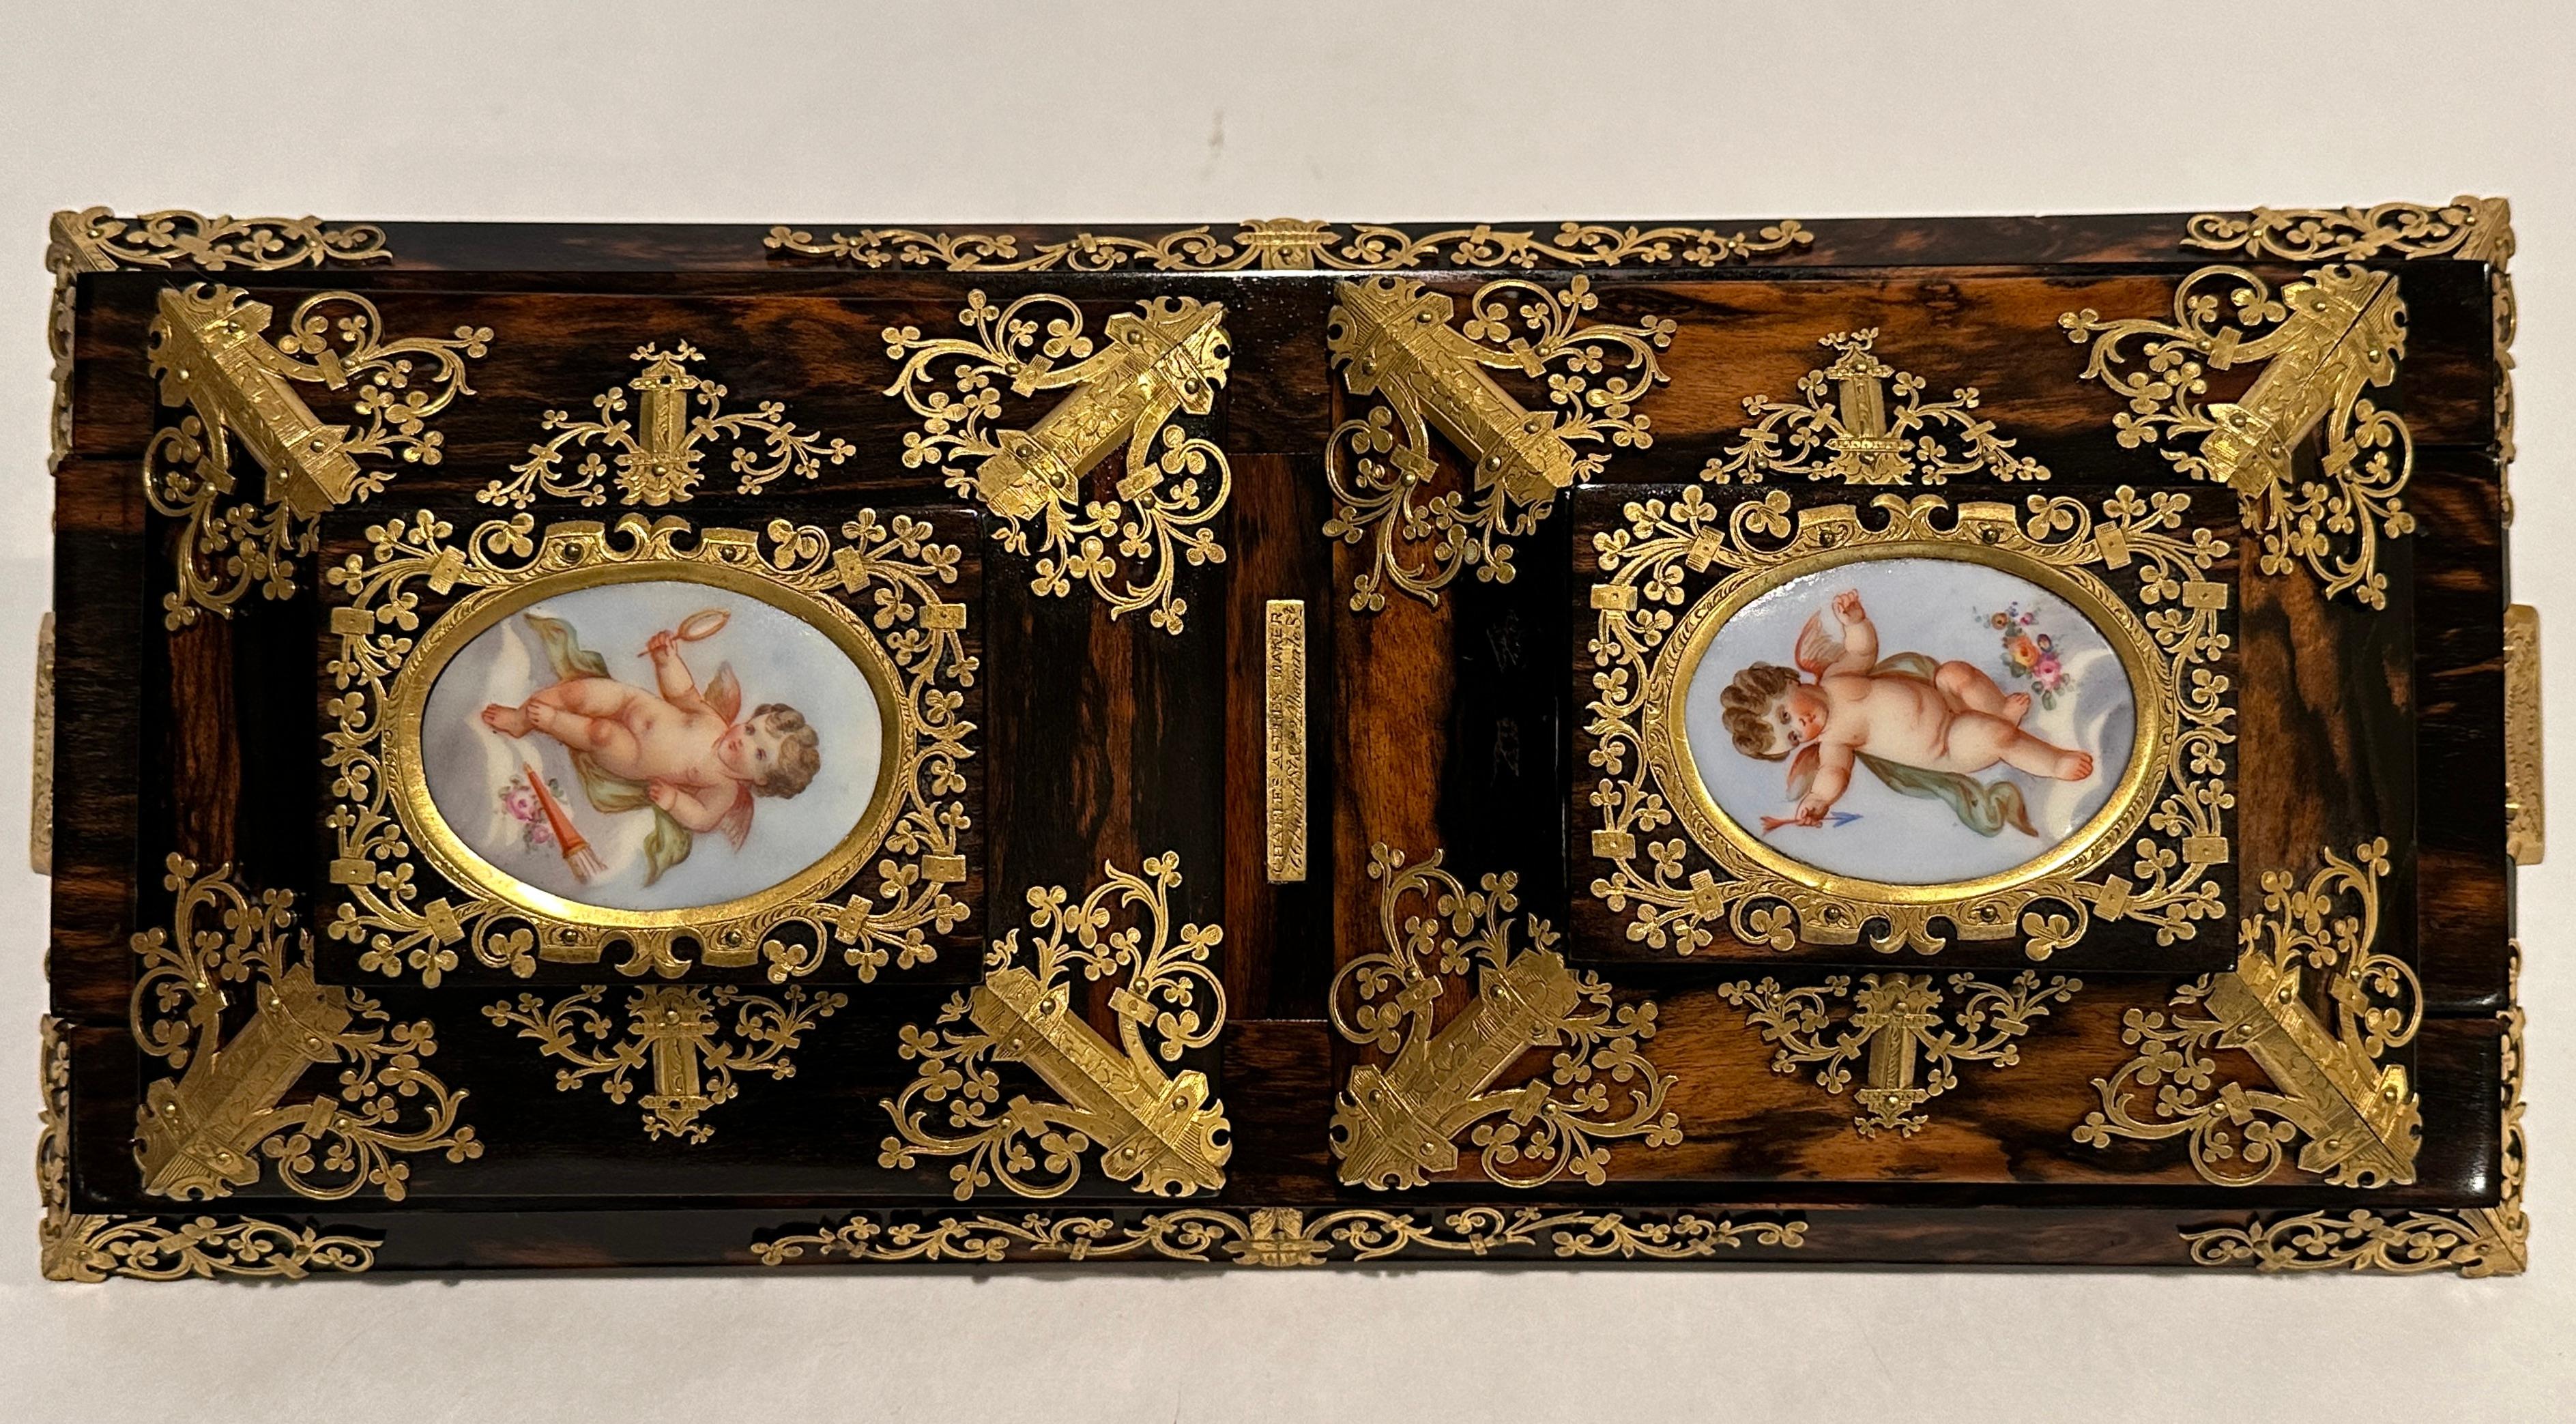 This is a high quality antique Victorian Coromandel self closing adjustable book slide, circa 1860 in date.

It features a pair of oval Sevres style plaques depicting cherubs at play and it is wonderfully decorated with stupendous gilt bronze